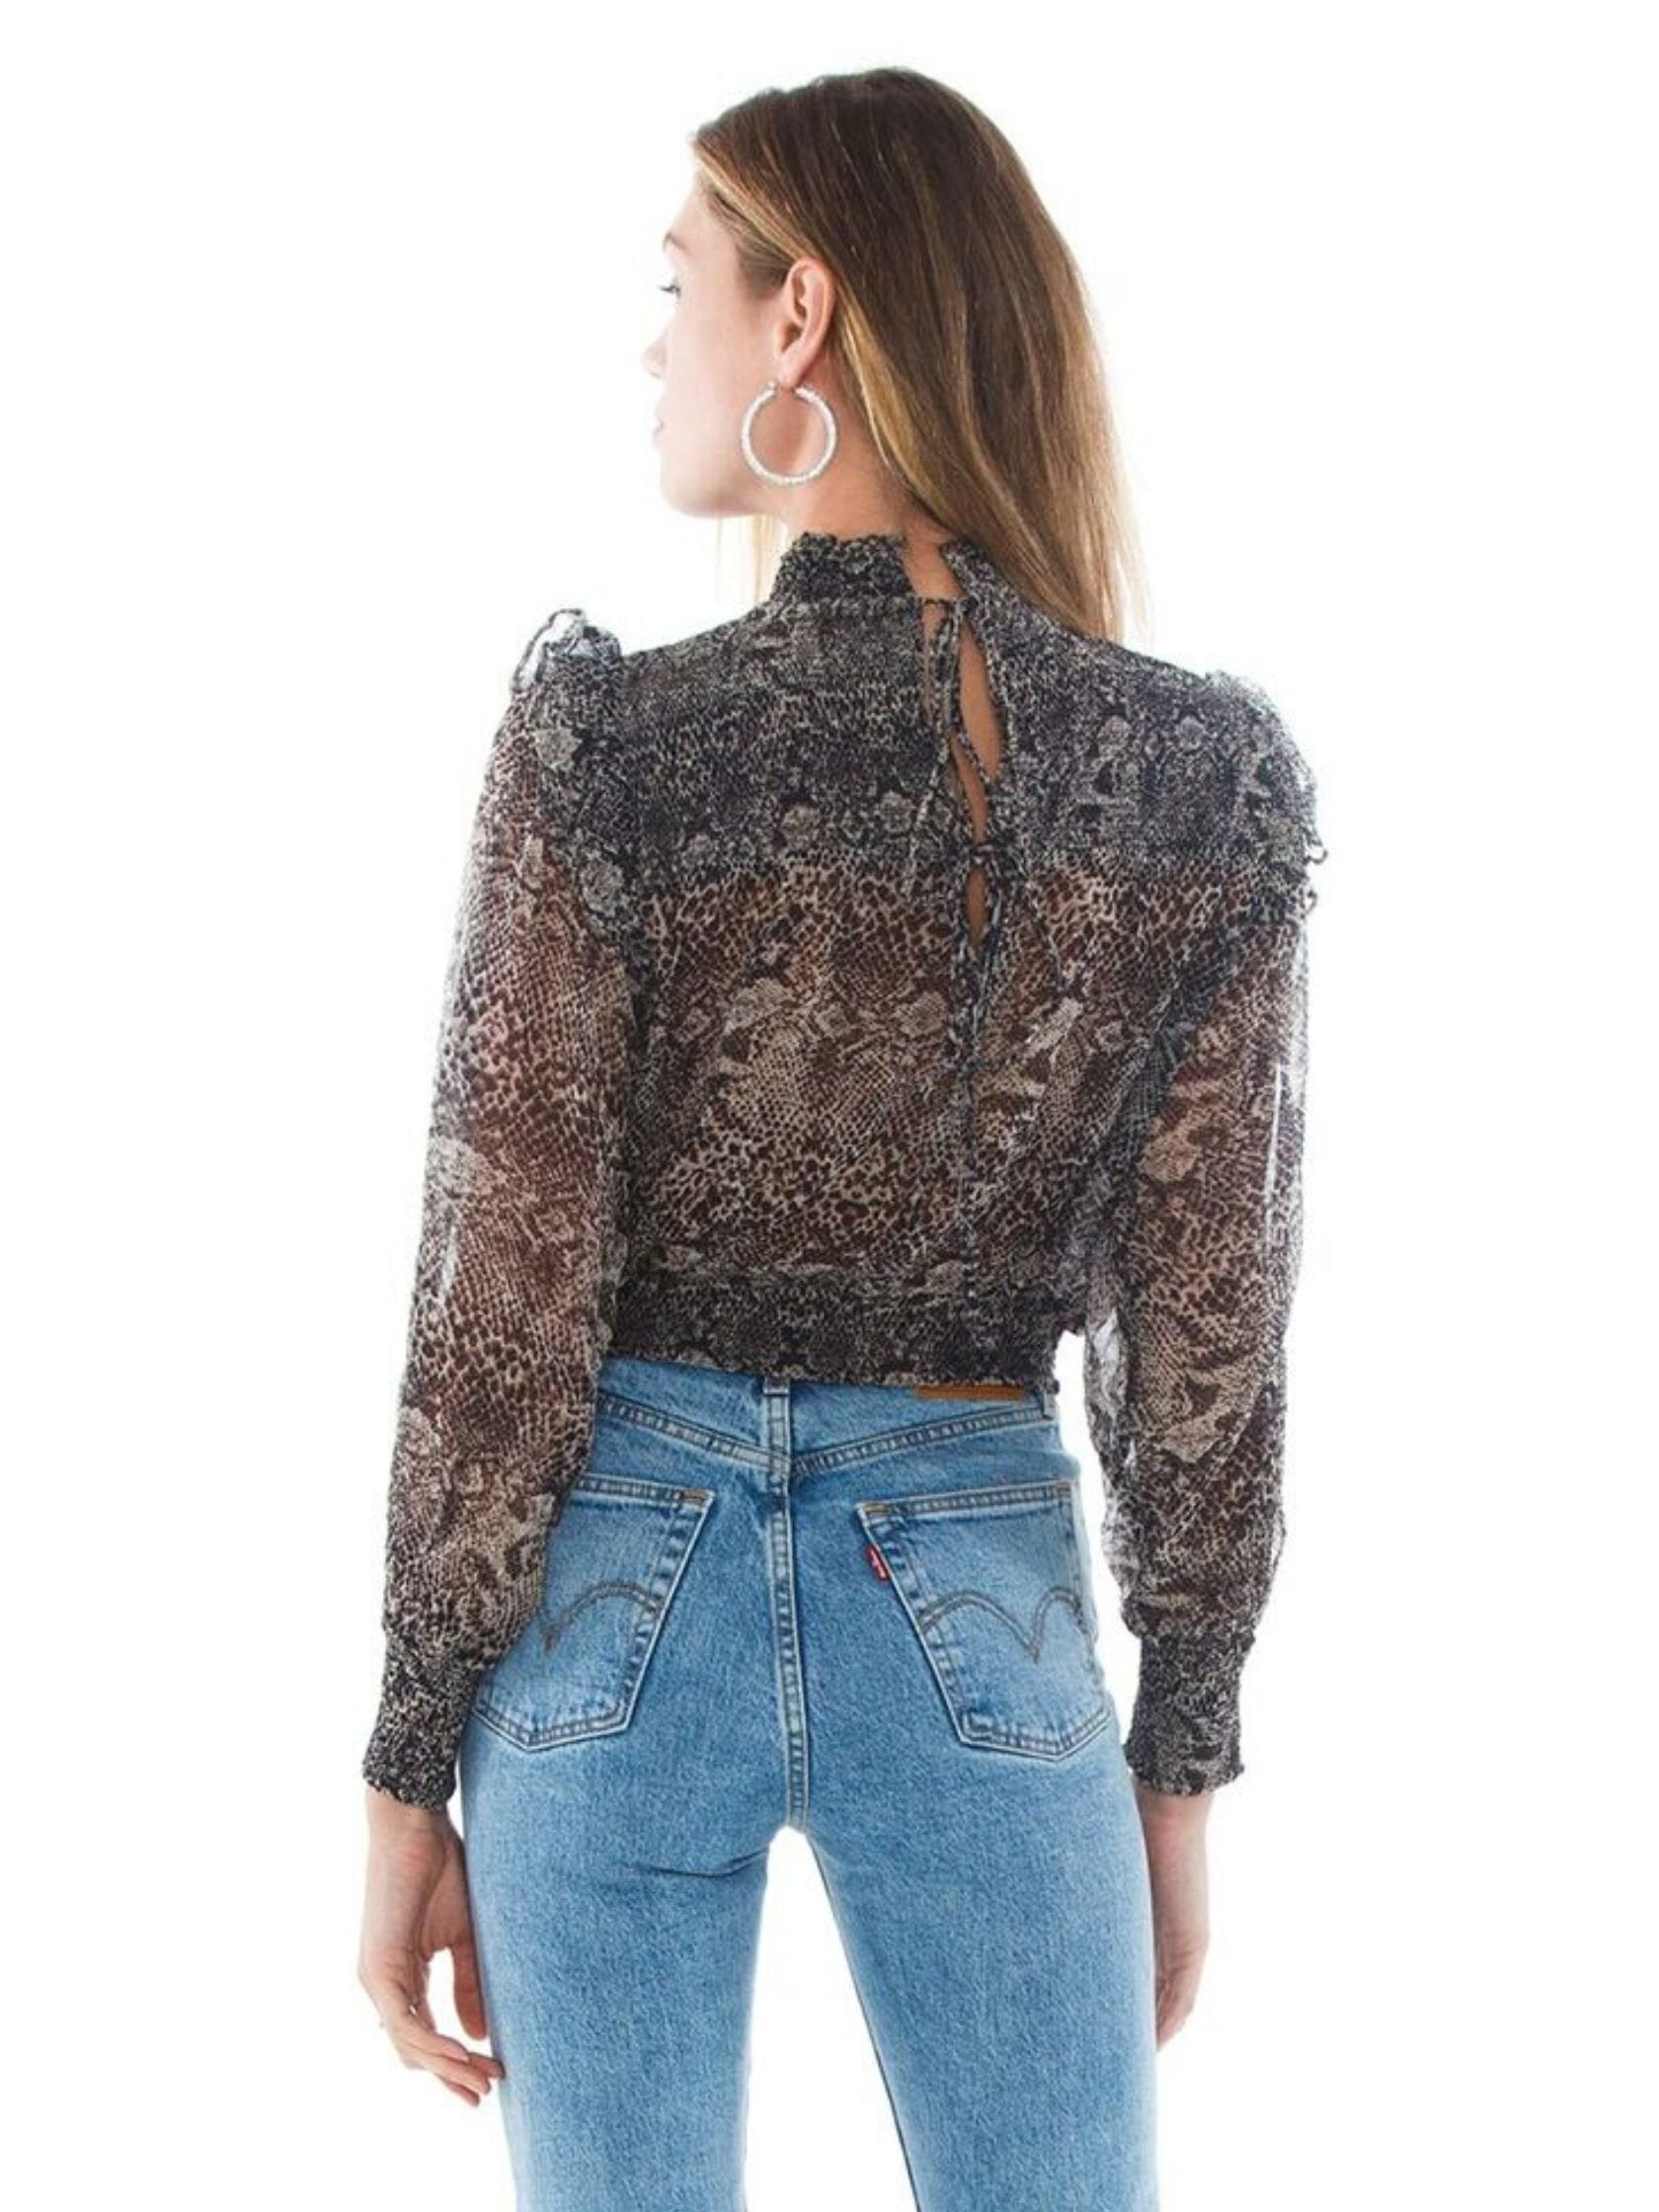 Free People Roma Blouse in Black